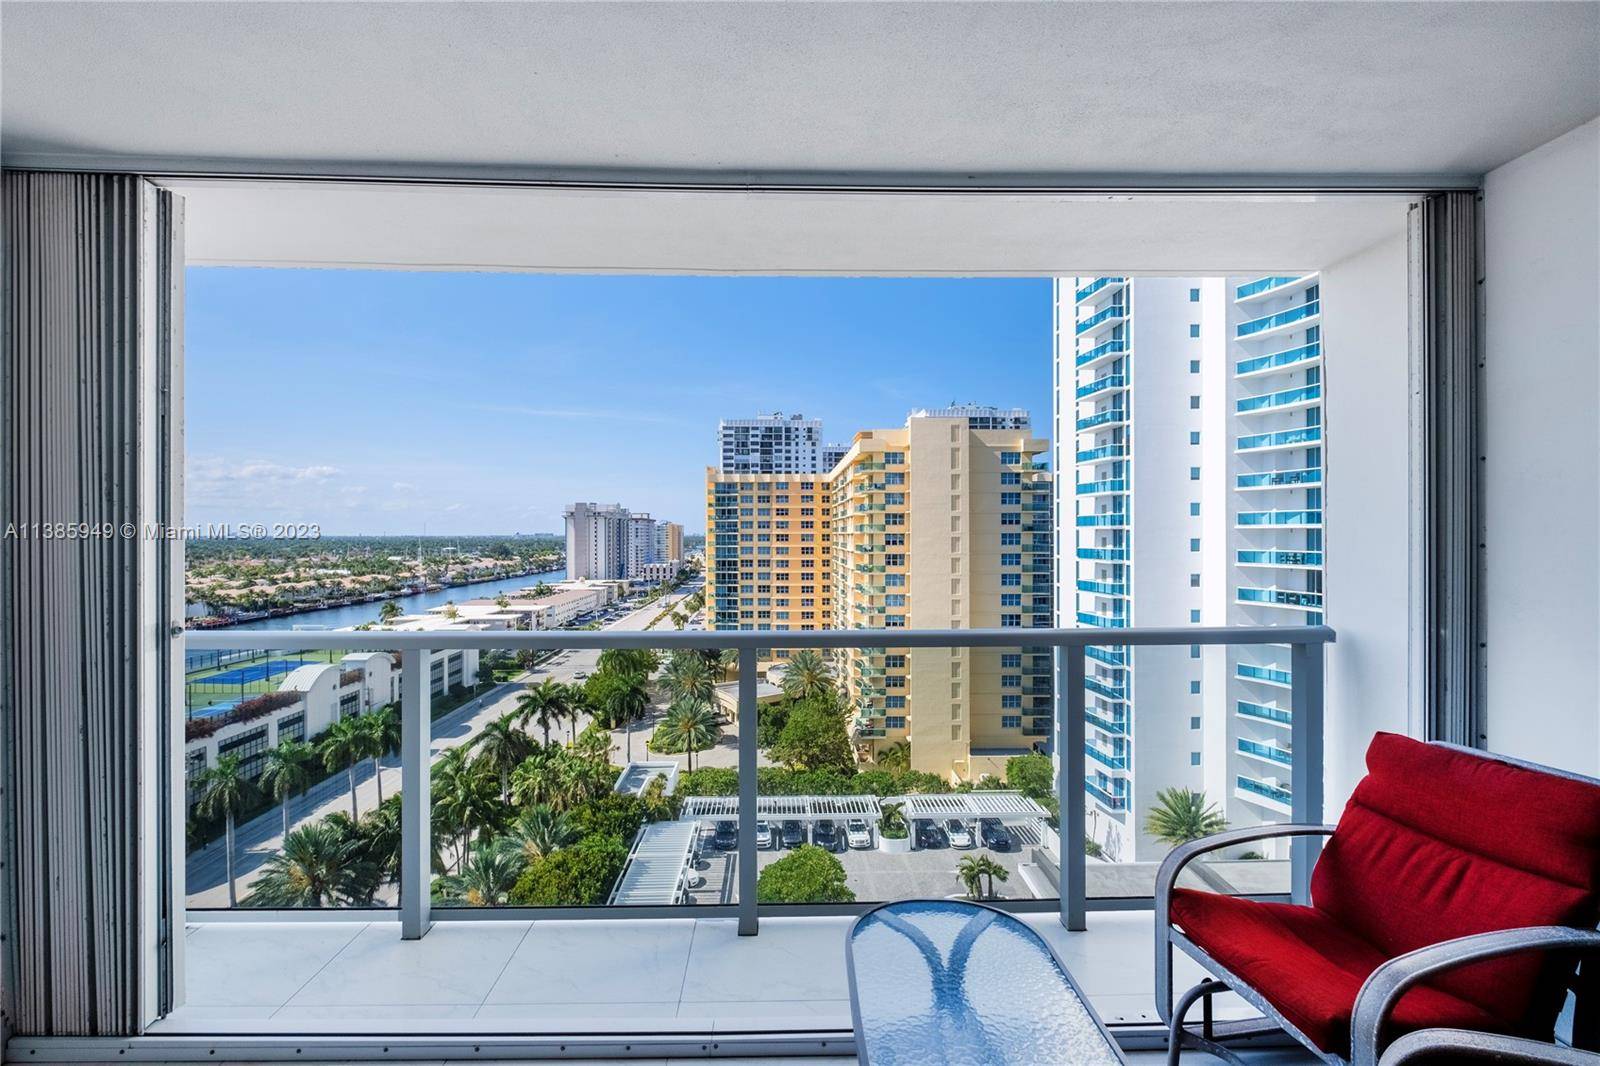 Luminous 2 bedroom w 2 full bathrooms facing the Intracoastal w partial Ocean view, not remodeled but in mint condition ready for its new owners.